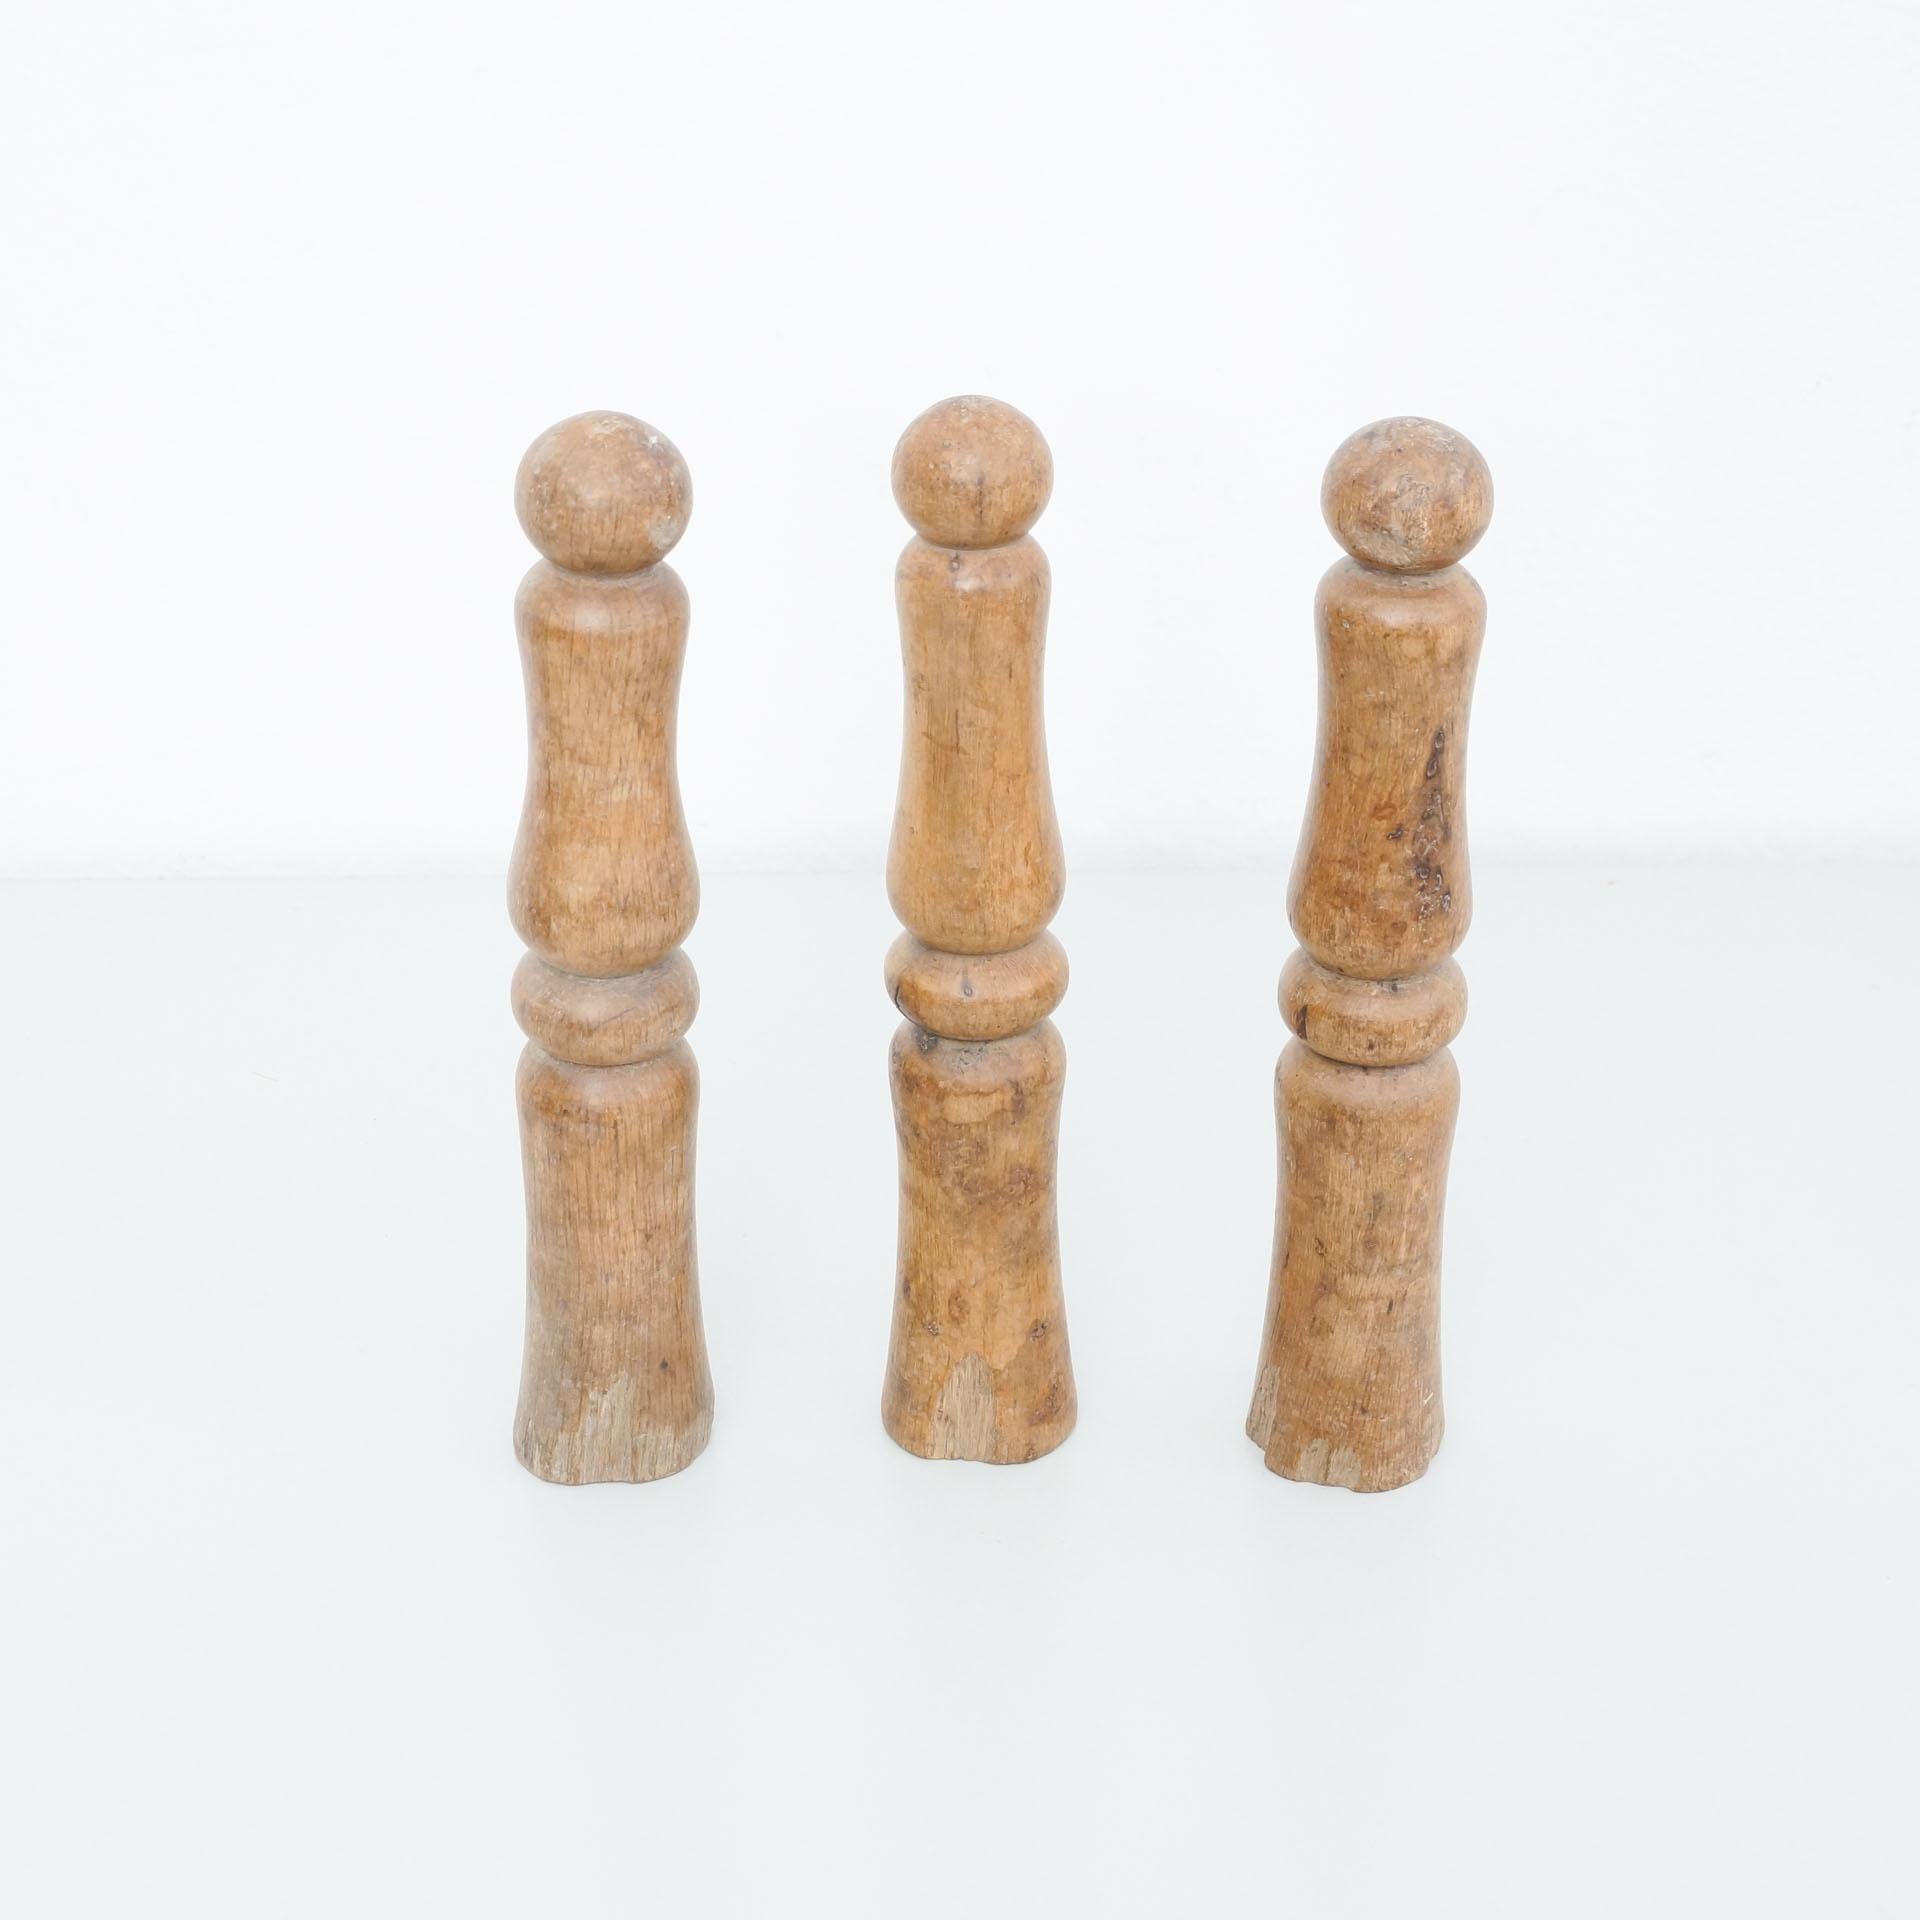 Set of three antique skittles, circa 1950.
From unknown manufacturer, Spain.

In original condition, with minor wear consistent with age and use, preserving a beautiful patina.

Materials:
Wood

Dimensions:
Ø 6 cm x H 32 cm.